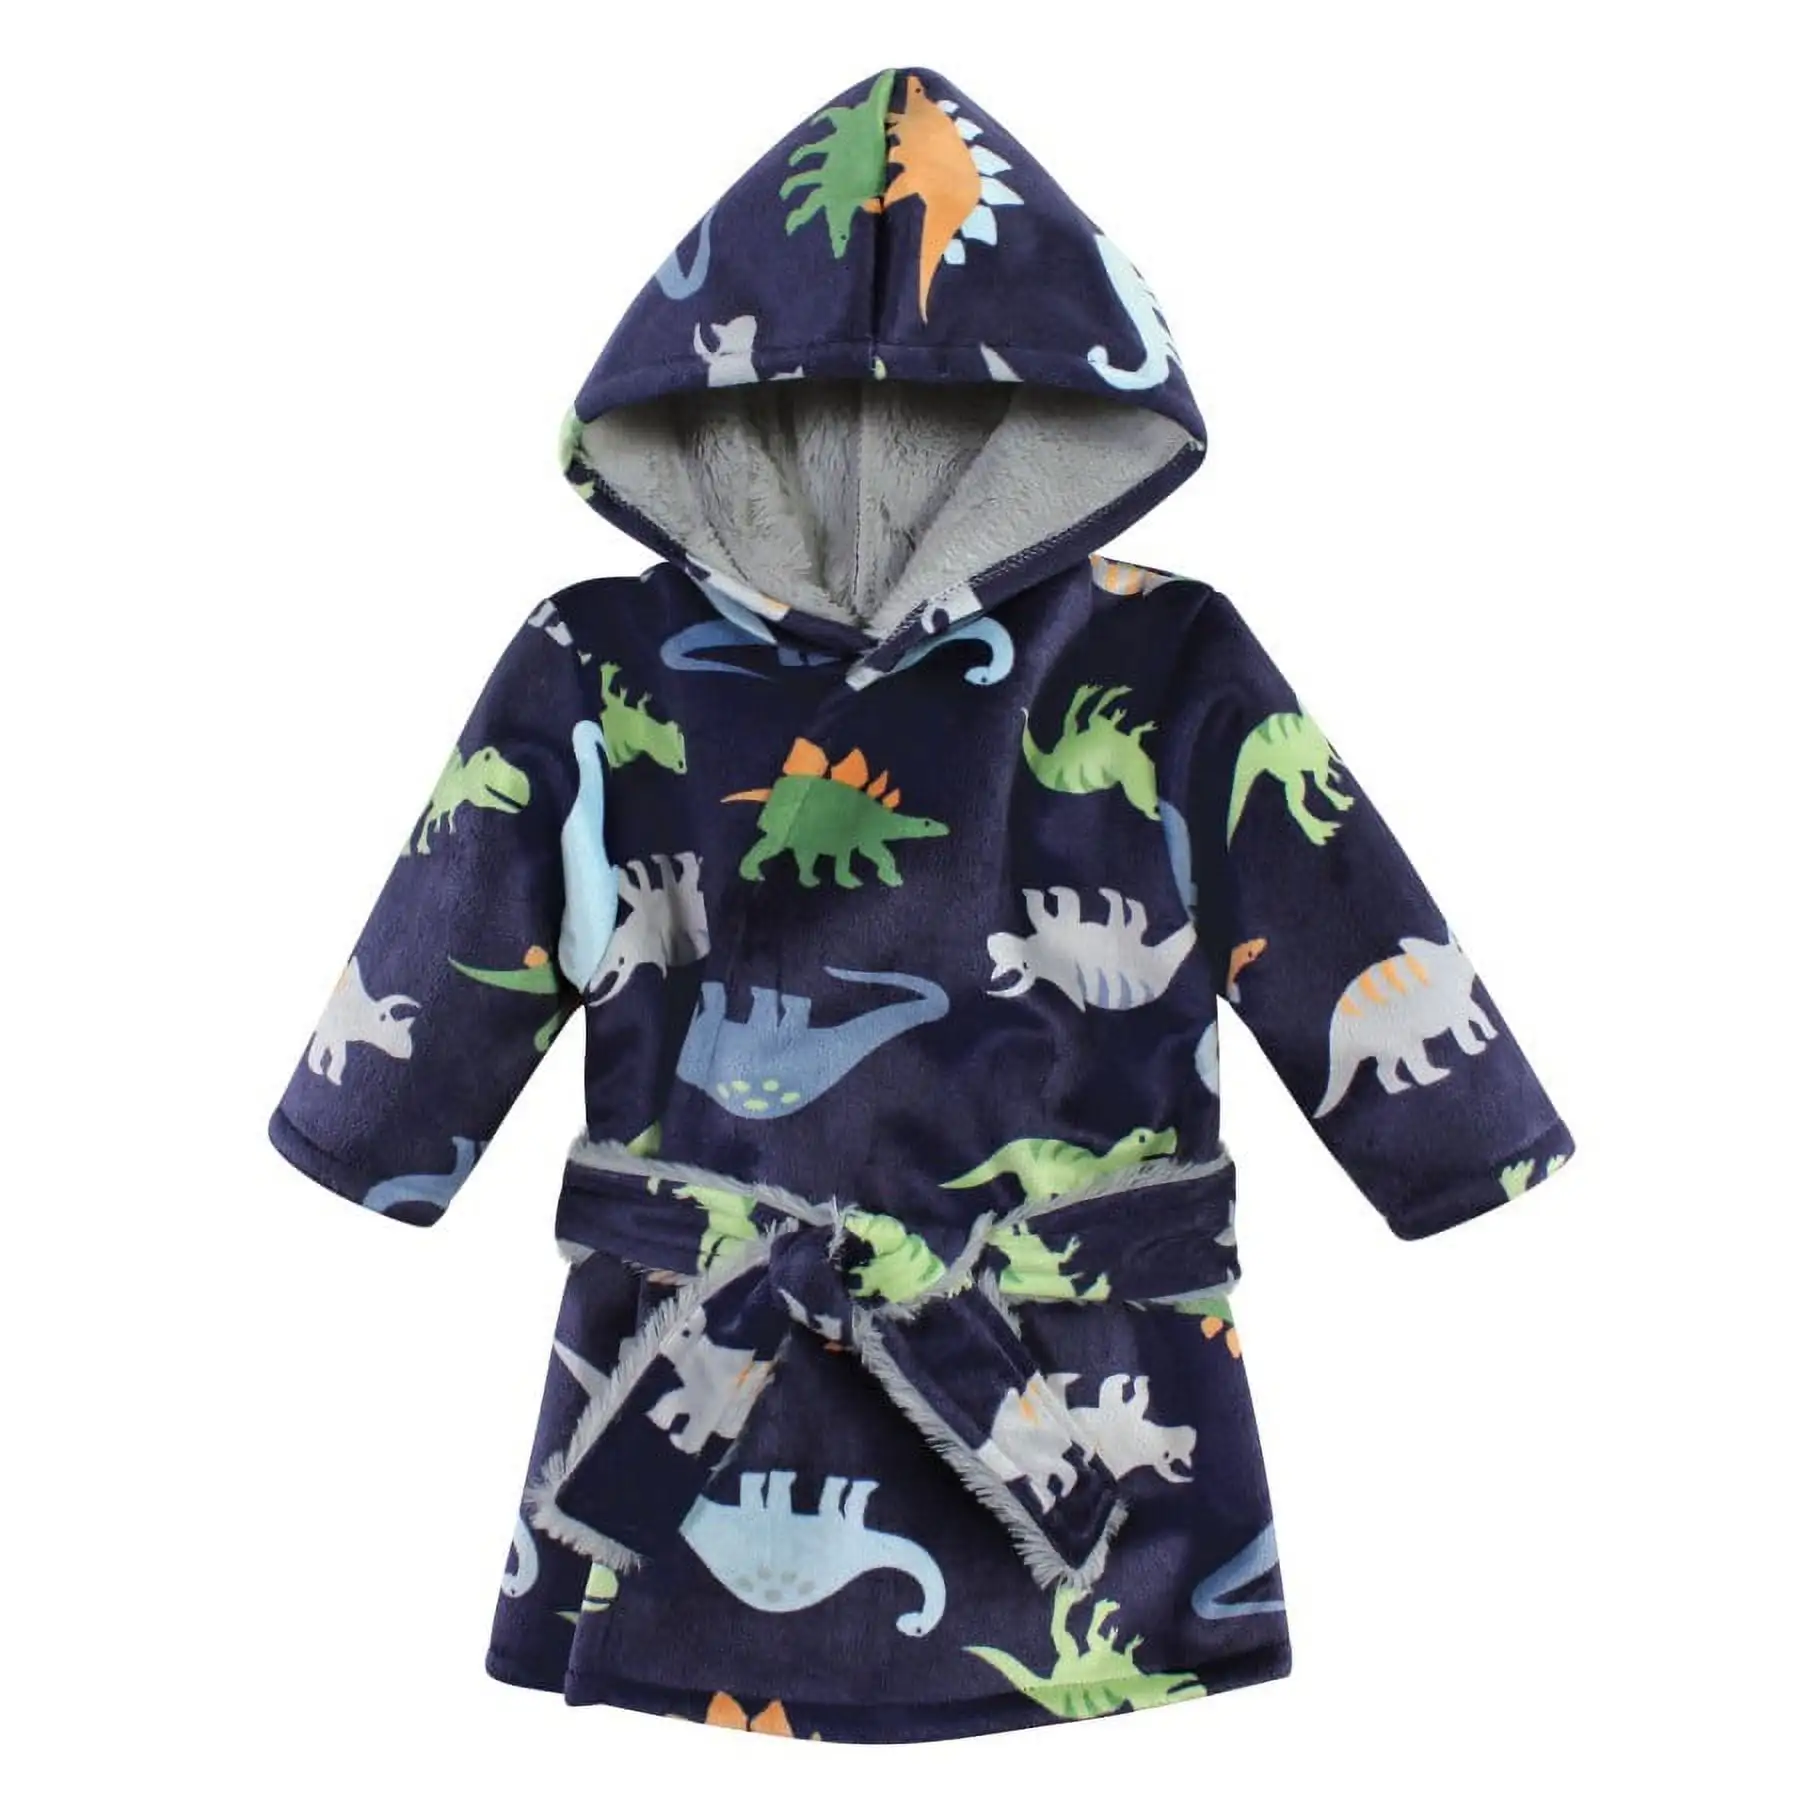 Hudson Baby Infant Boy Mink with Faux Fur Lining Pool and Beach Robe Cover-ups. Dinosaurs. 0-6 Months